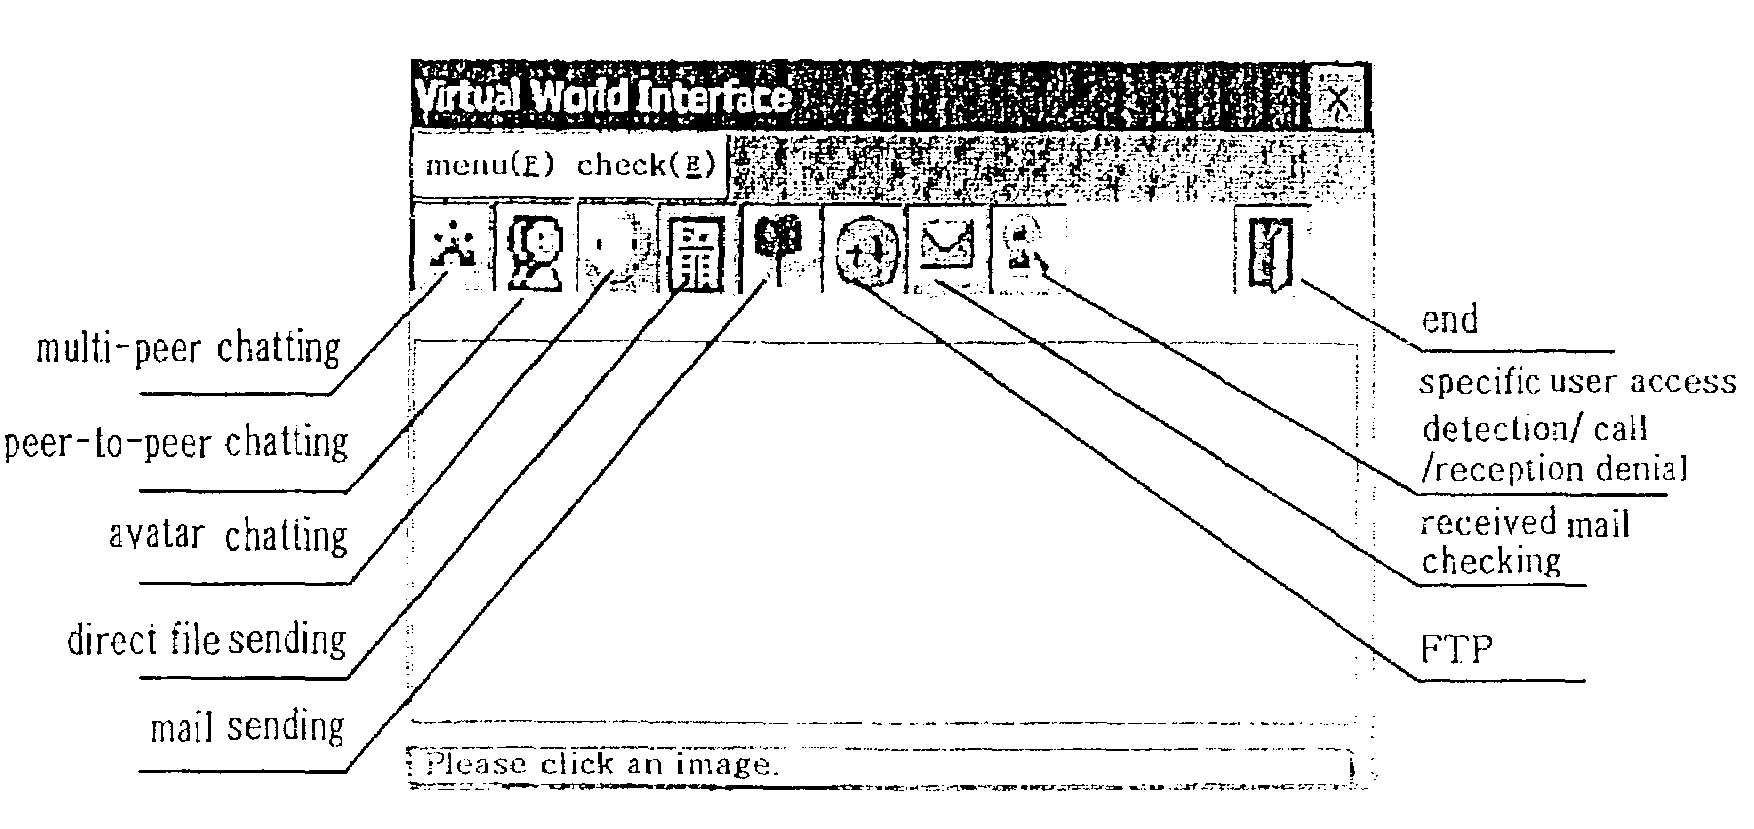 Multimedia communication method using virtual world interface in mobile personal computers